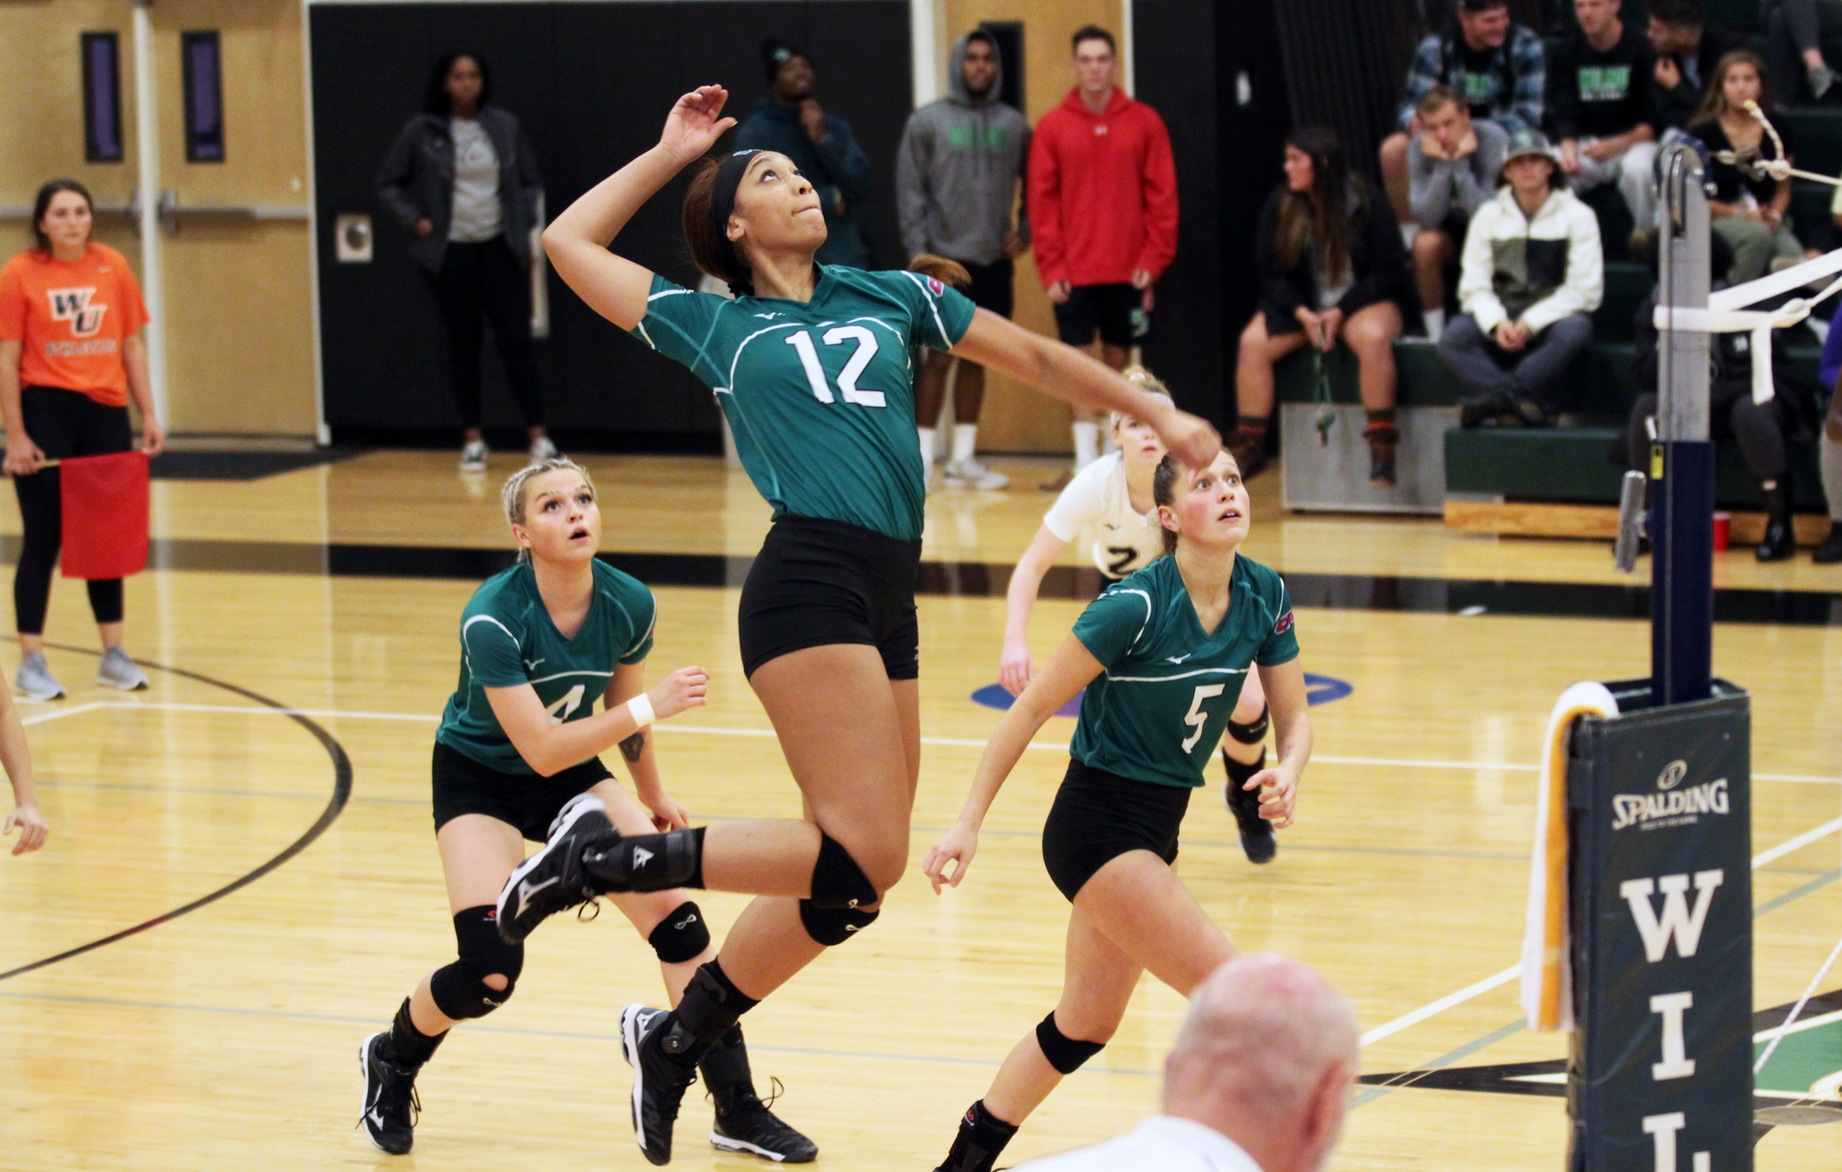 File photo of Rebecca Rawlinson led the team with 8 kills and 7 blocks against Dominican. Copyright 2019; Wilmington University. All rights reserved. Photo by Dan Lauletta. October 22, 2019 vs. Jefferson.